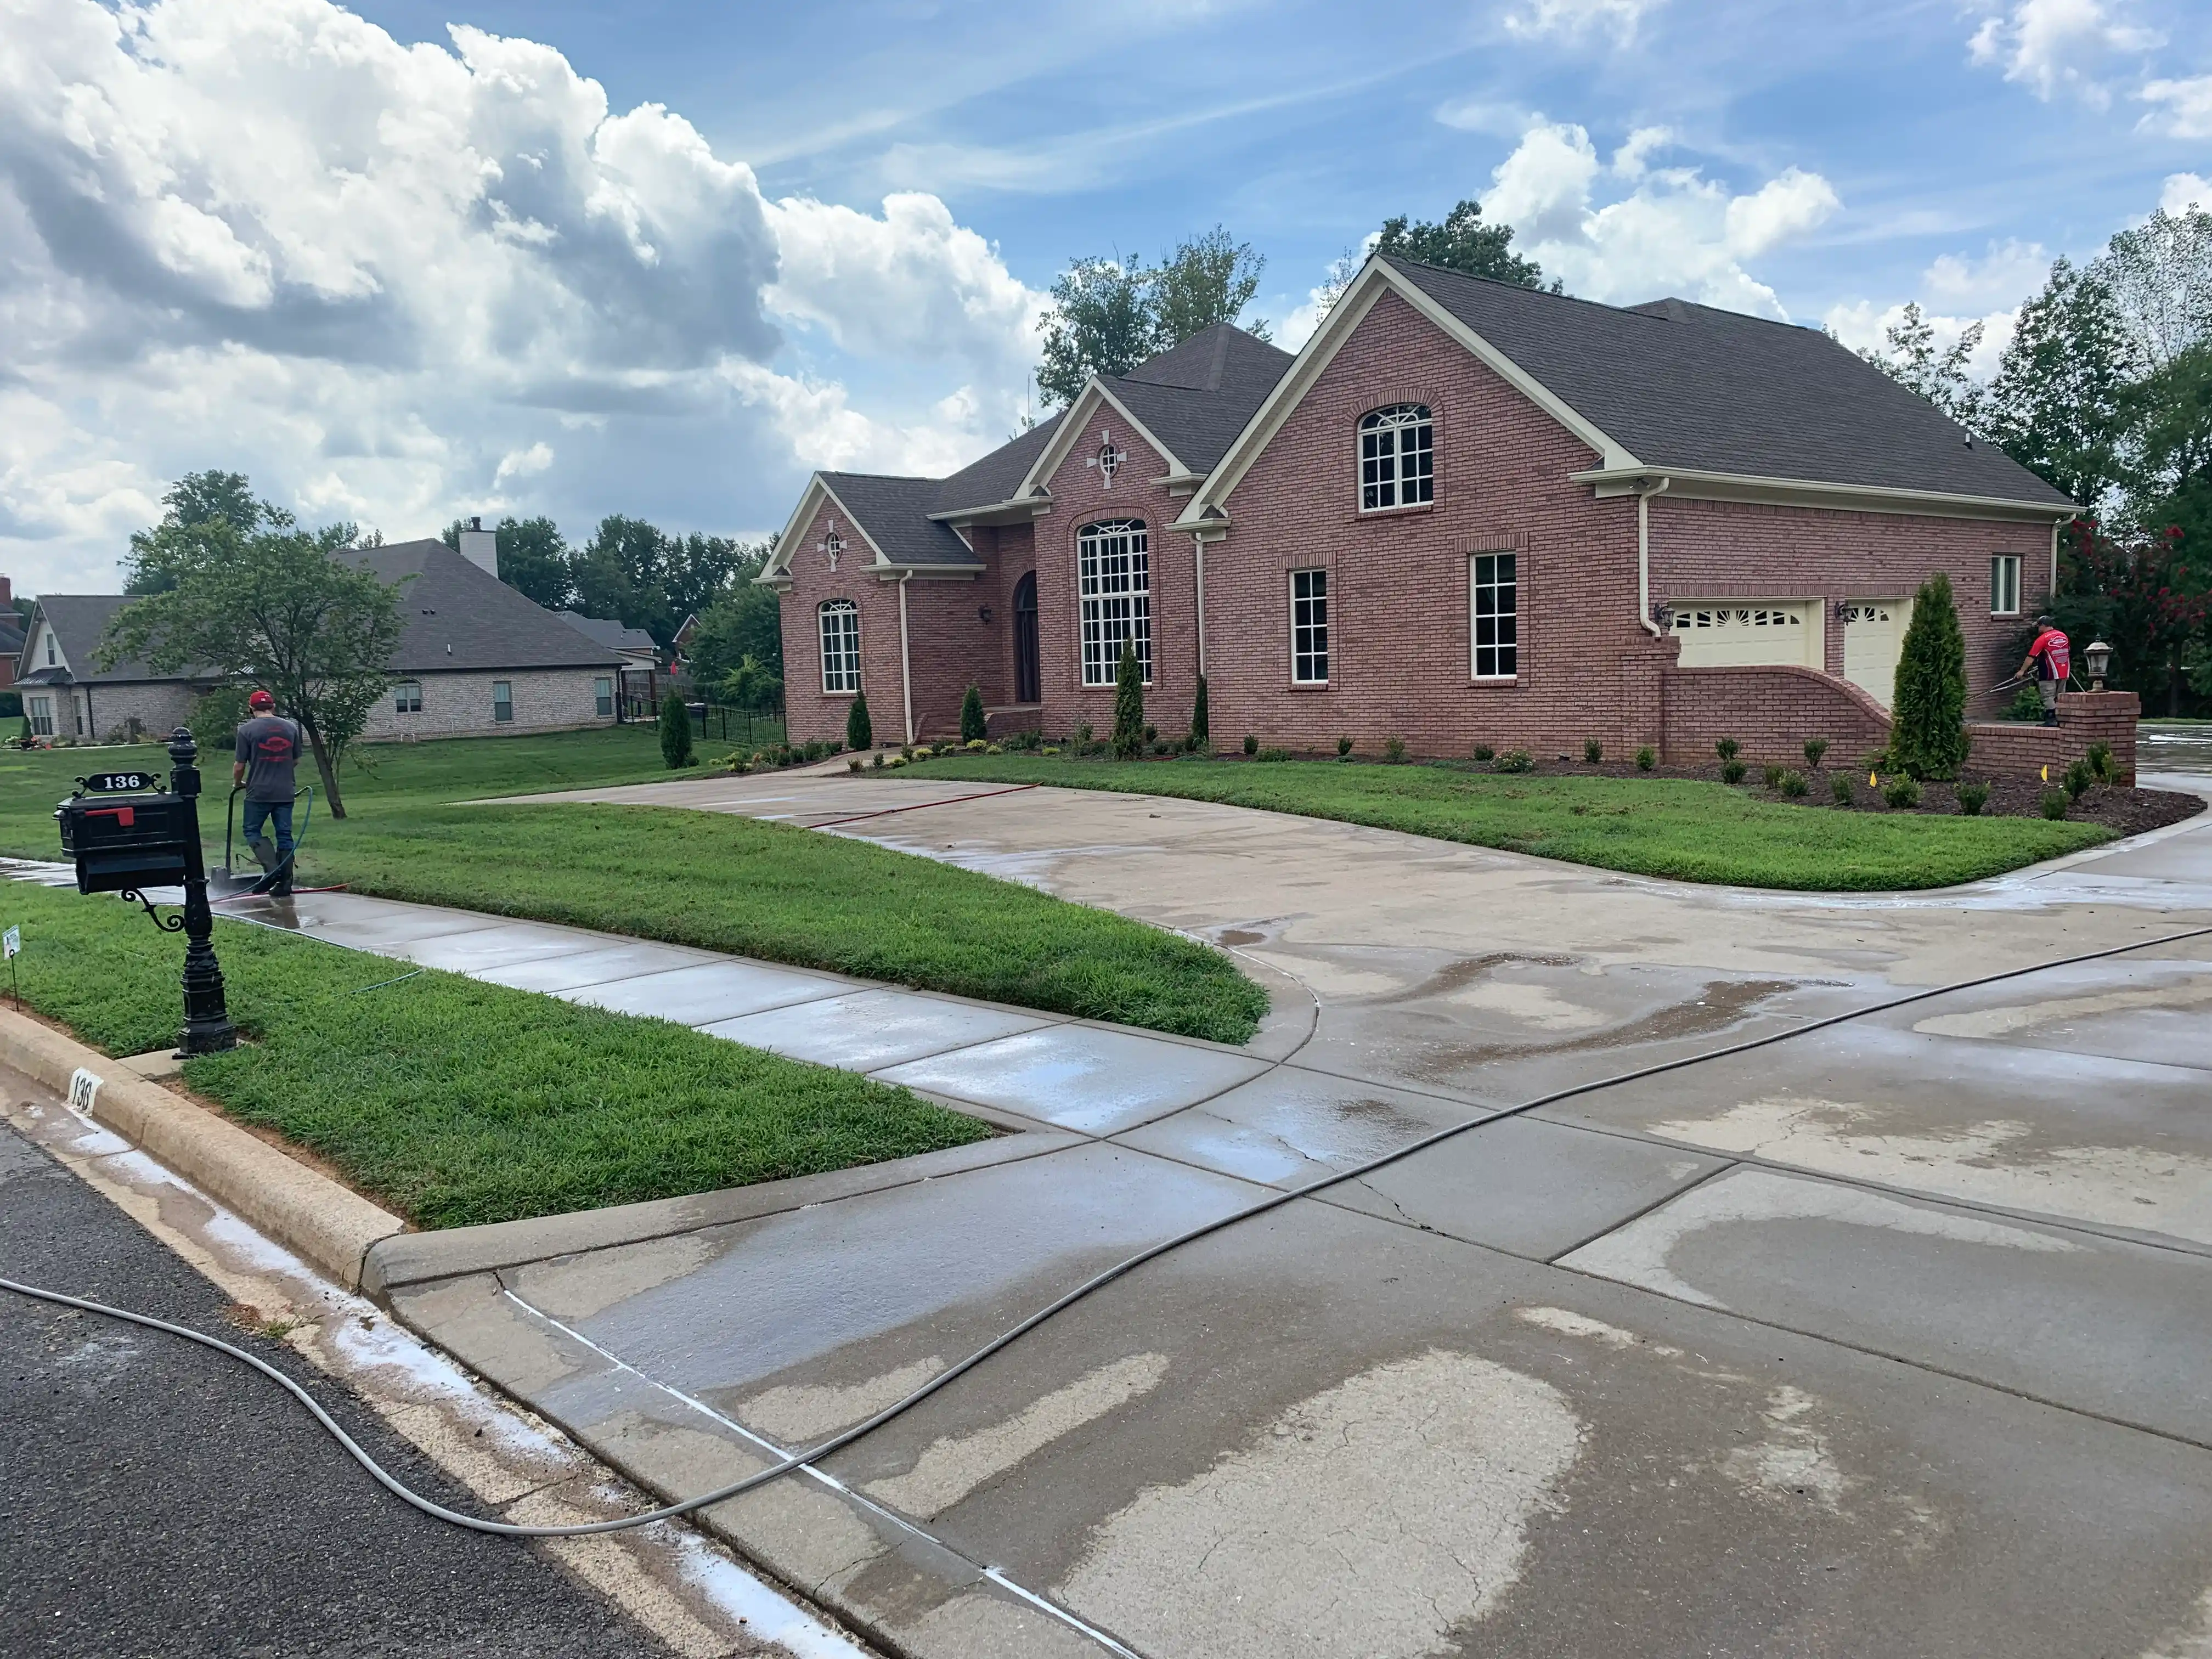 Driveway and Sidewalk Cleaning for Oakland Power Washing in Clarksville, TN